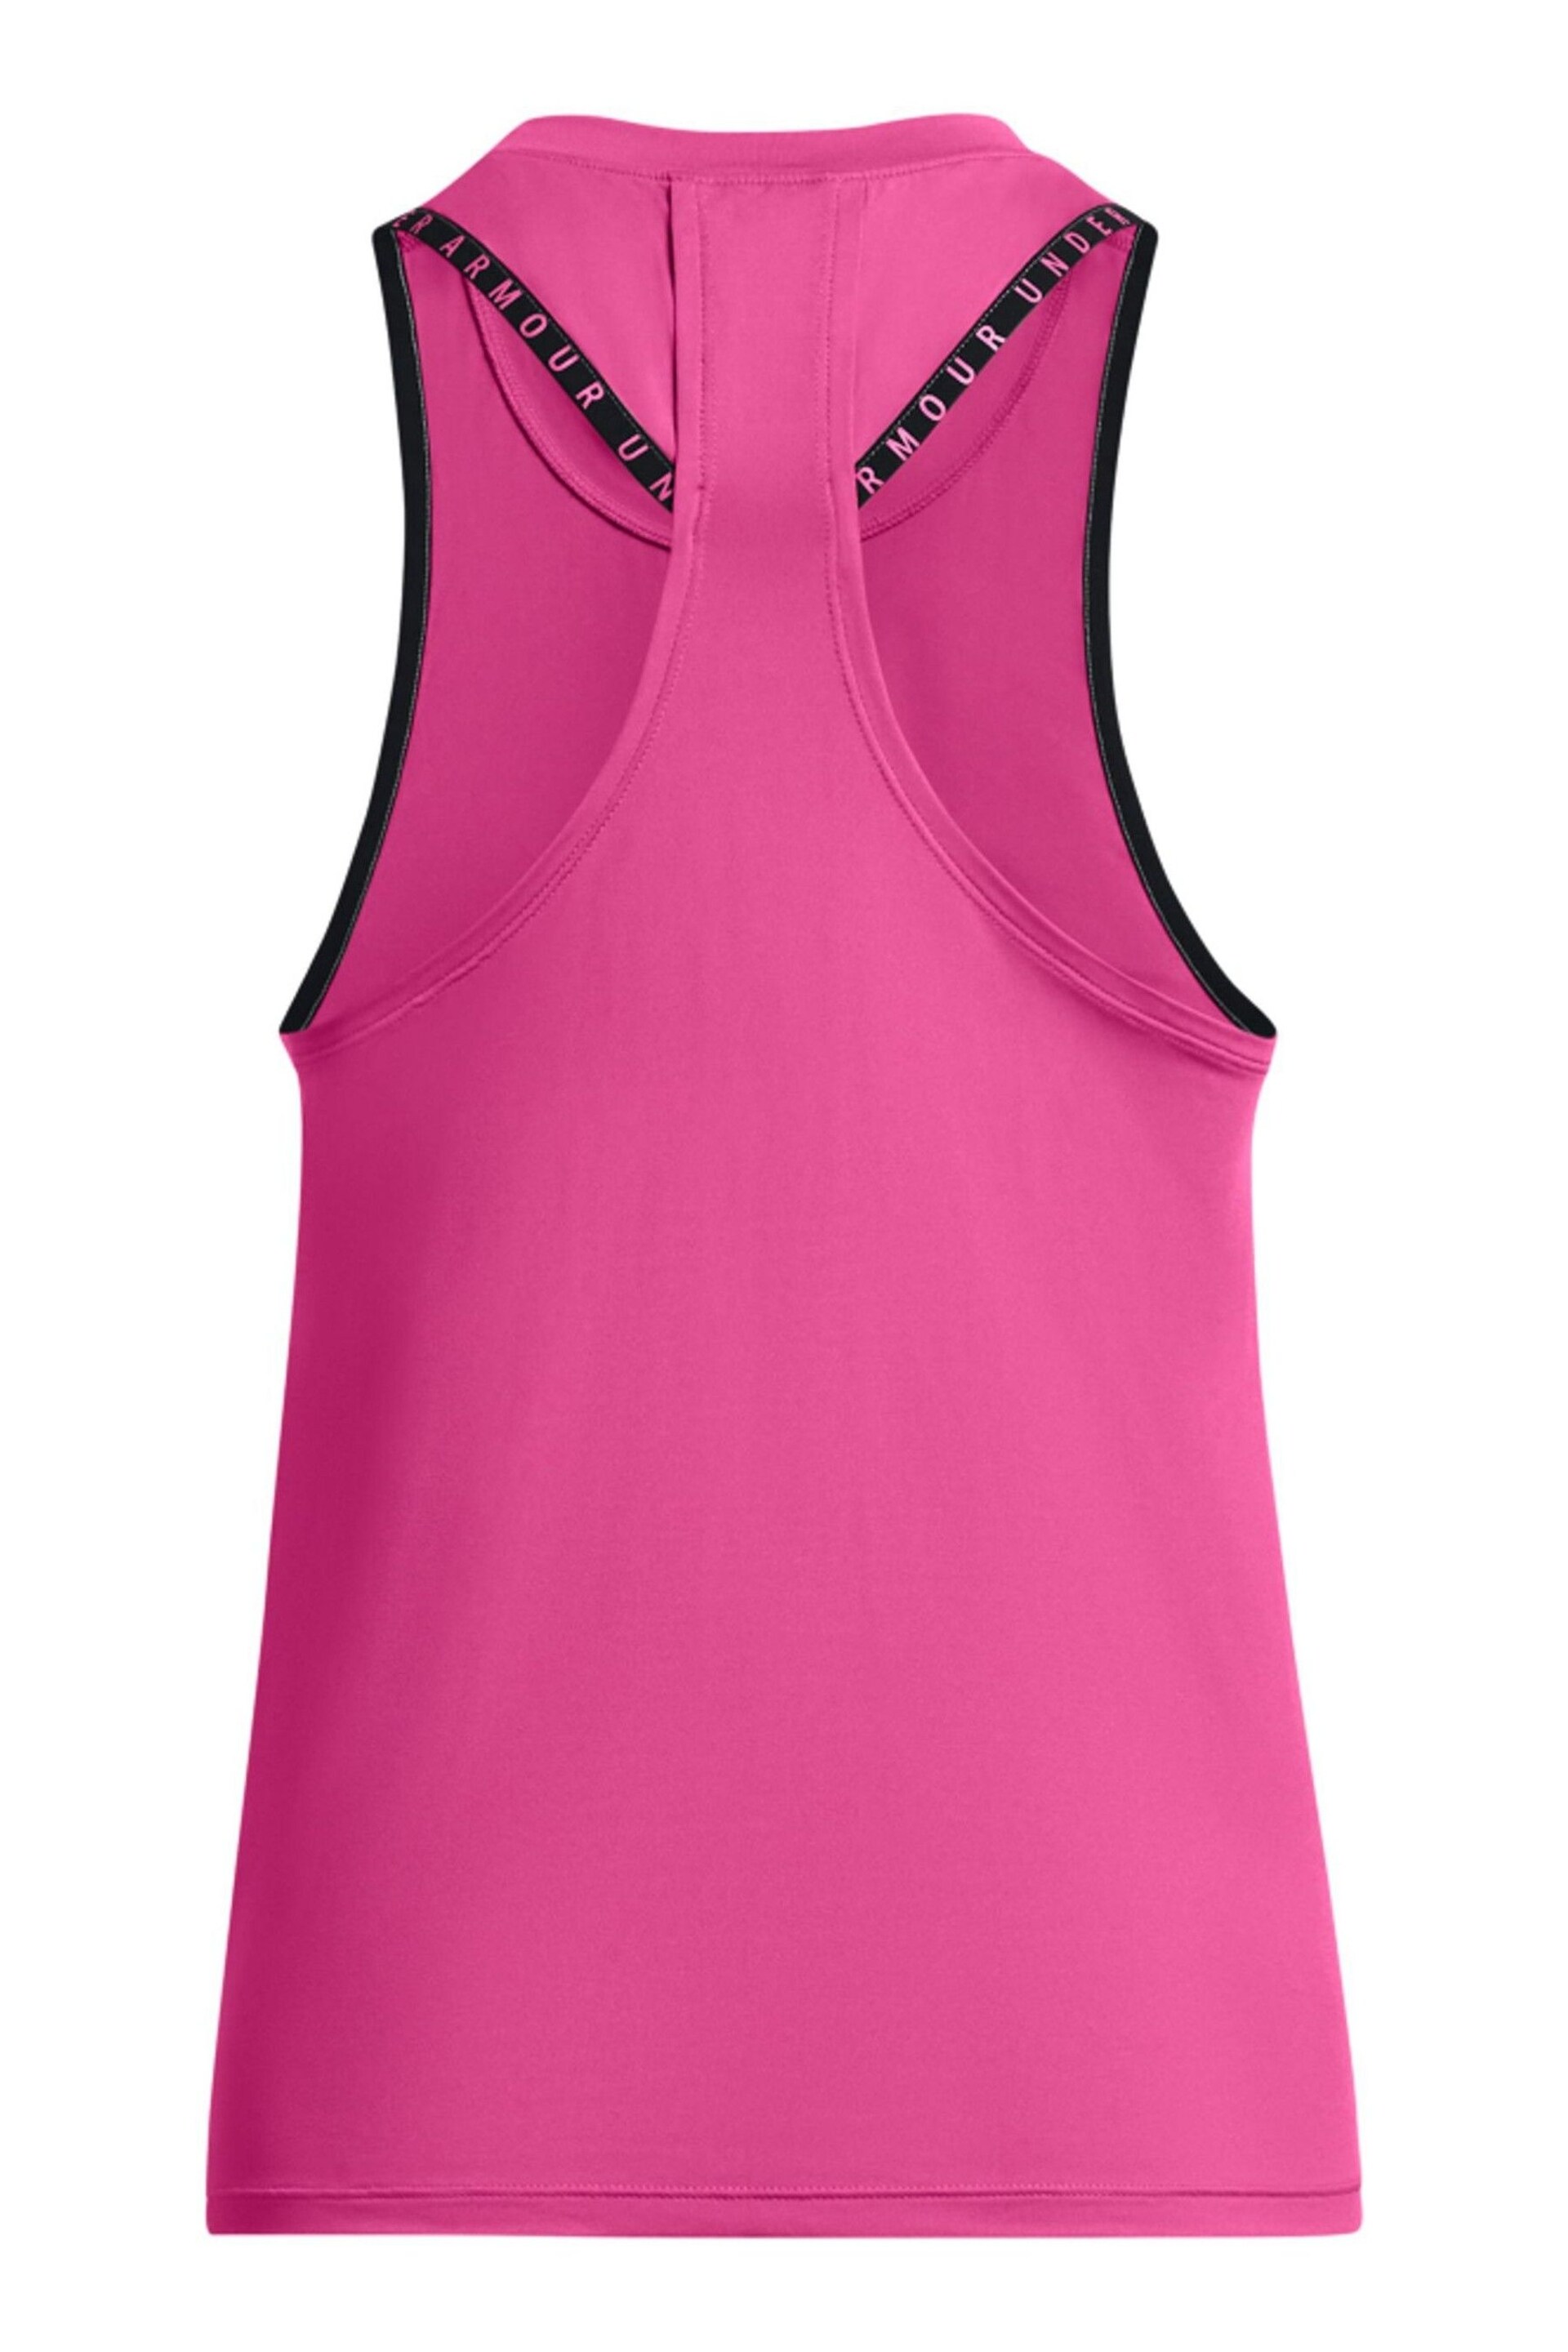 Under Armour Pink Knockout Novelty Tank - Image 5 of 5